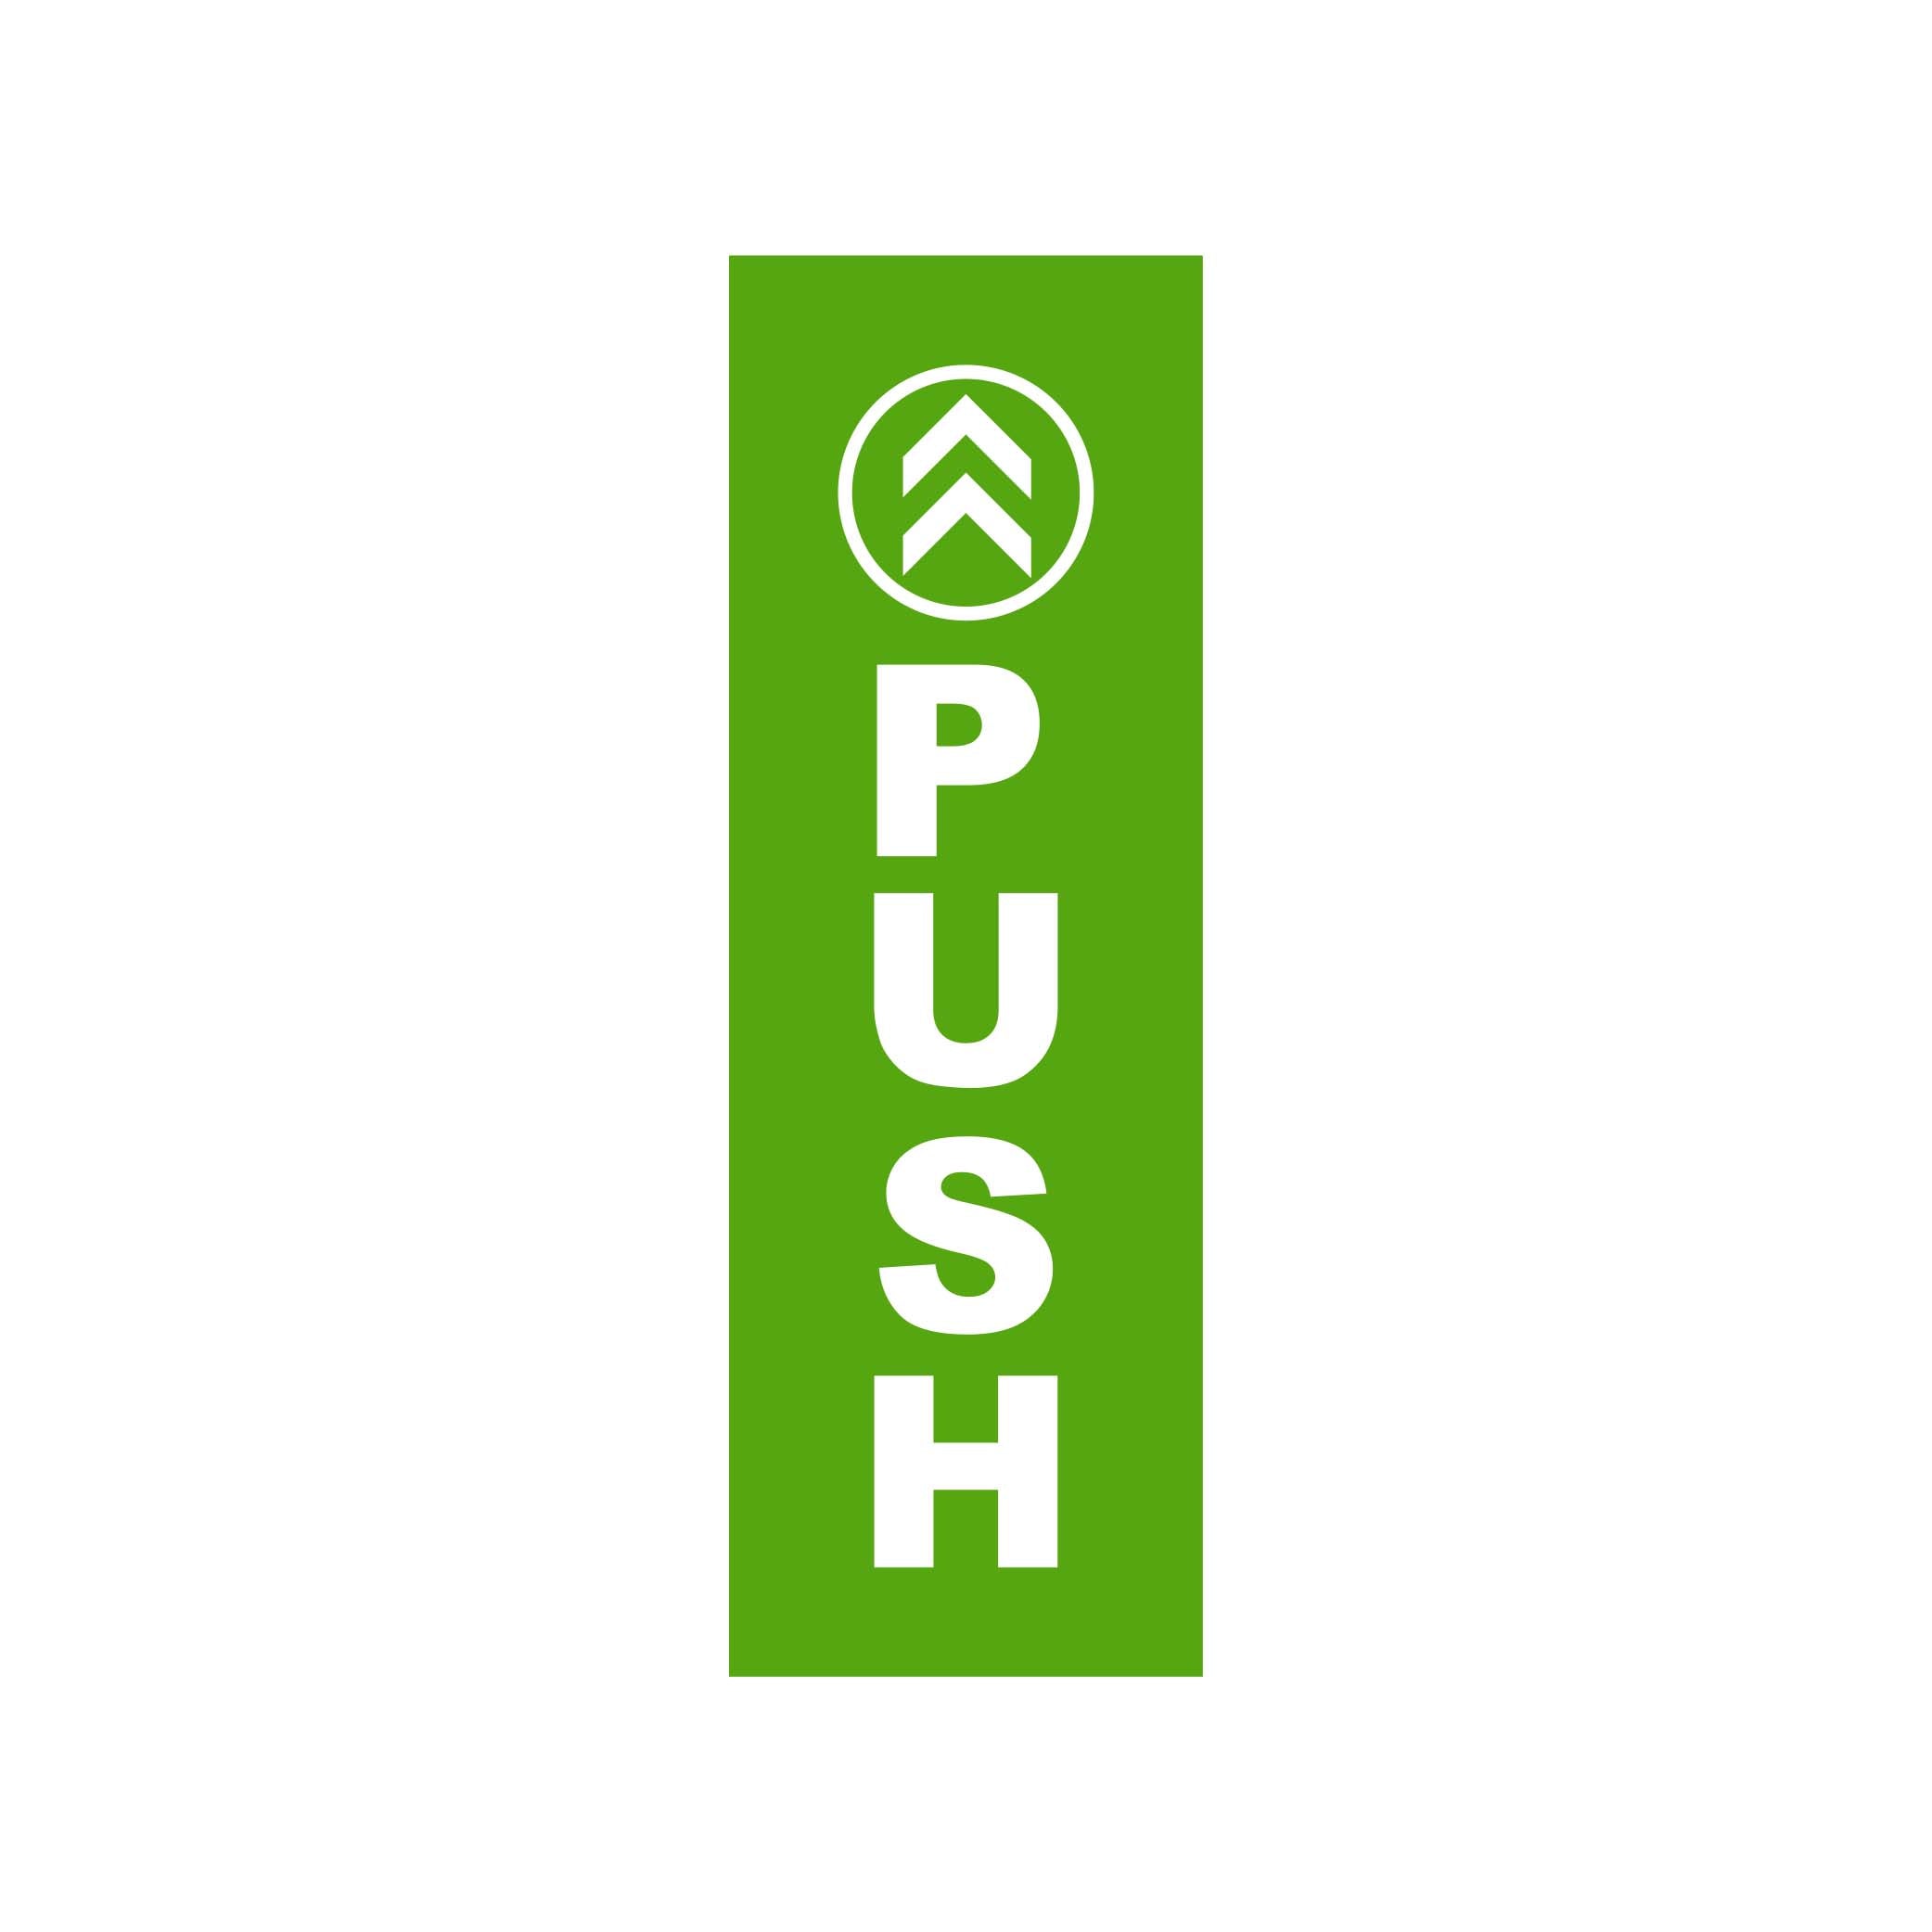 PUSH SIGN - GET SIGNS